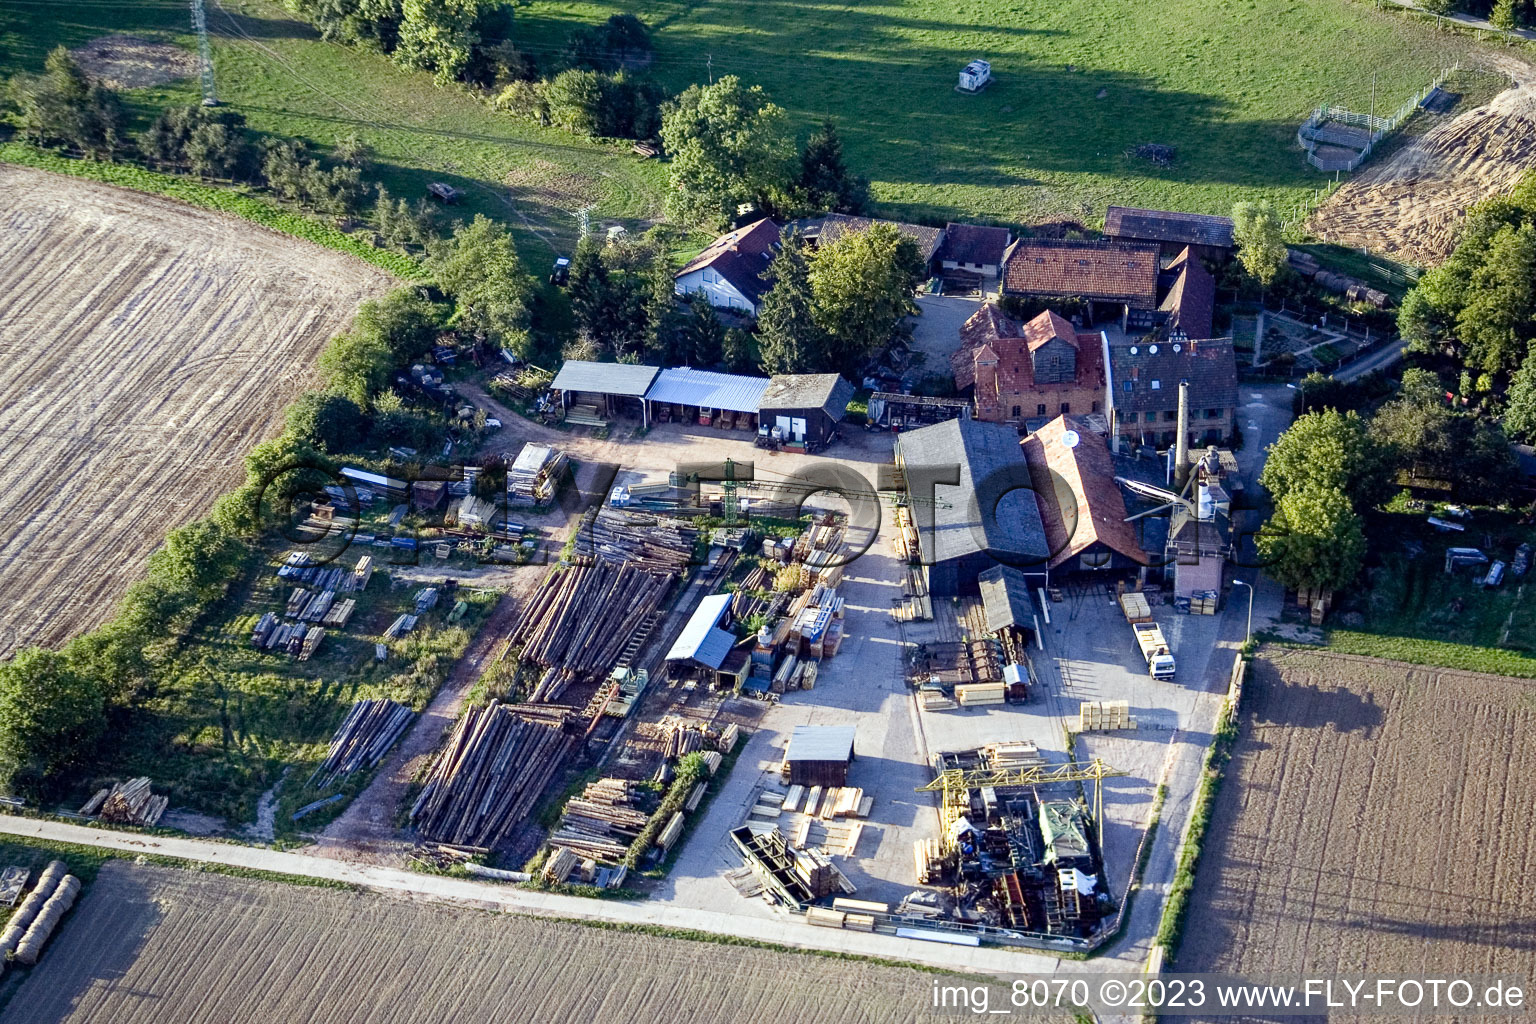 Aerial view of Schaidter Mill (Orth sawmill) in the district Schaidt in Wörth am Rhein in the state Rhineland-Palatinate, Germany